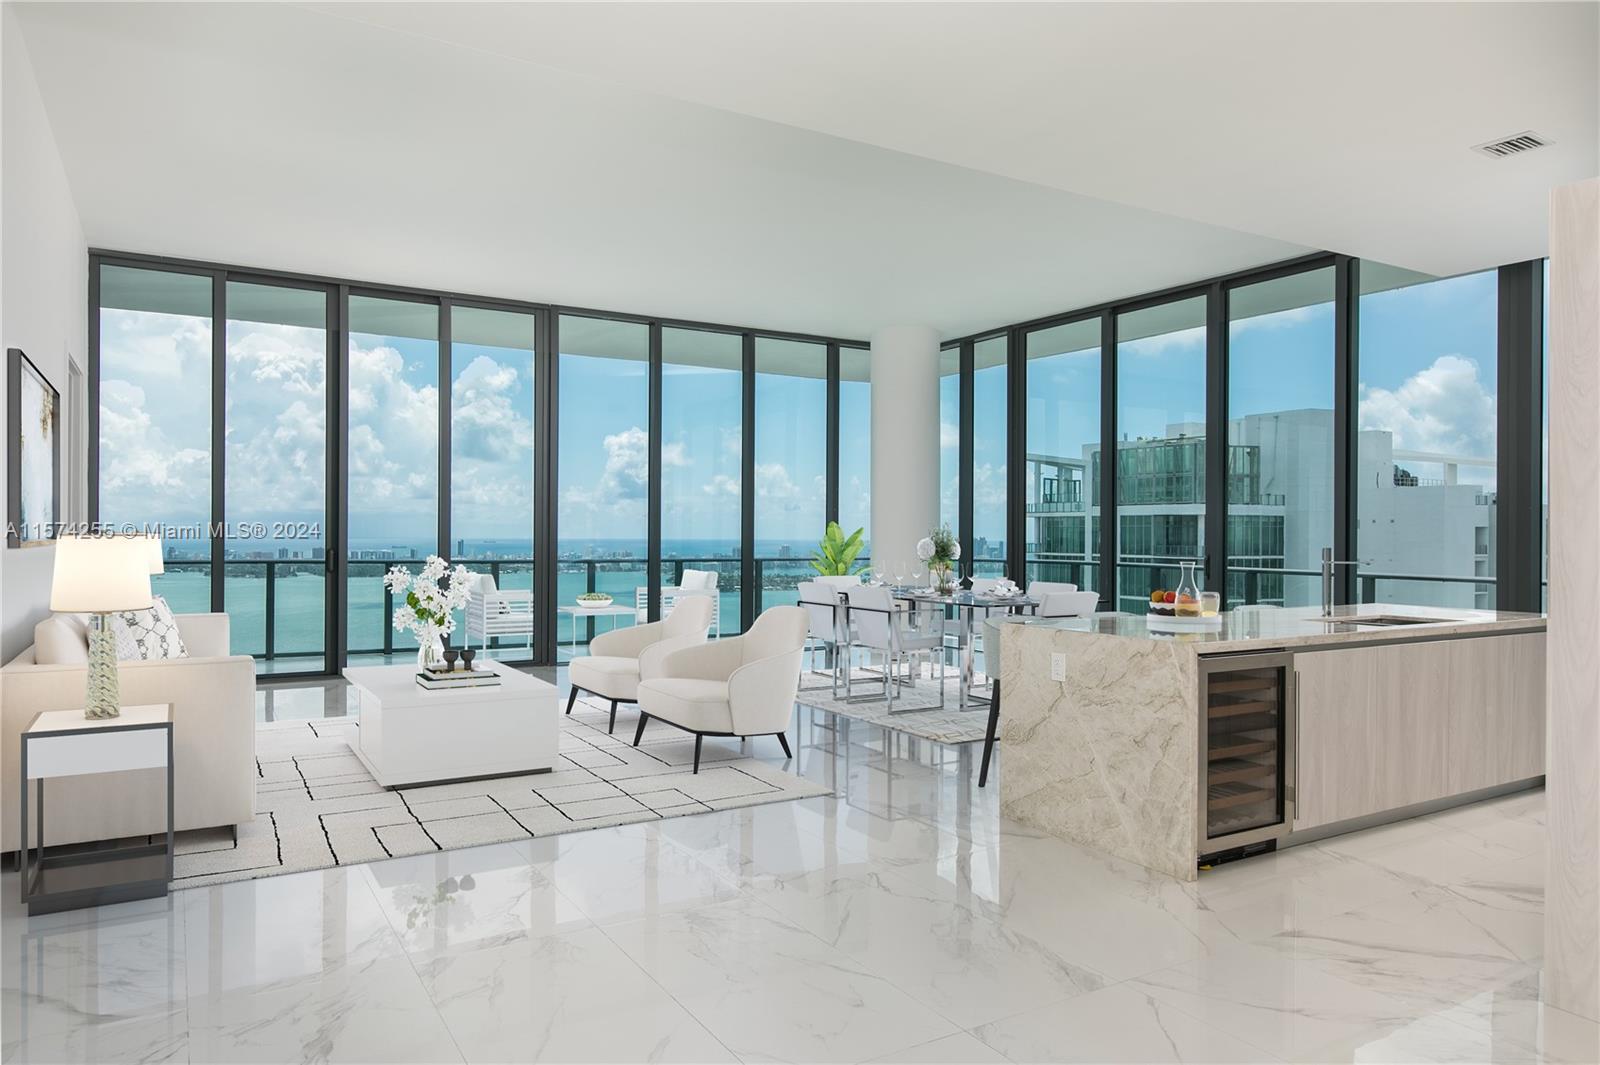 Luxury living in this exquisite PH with unobstructed ocean views. 4 beds, 4.5 baths, this residence 